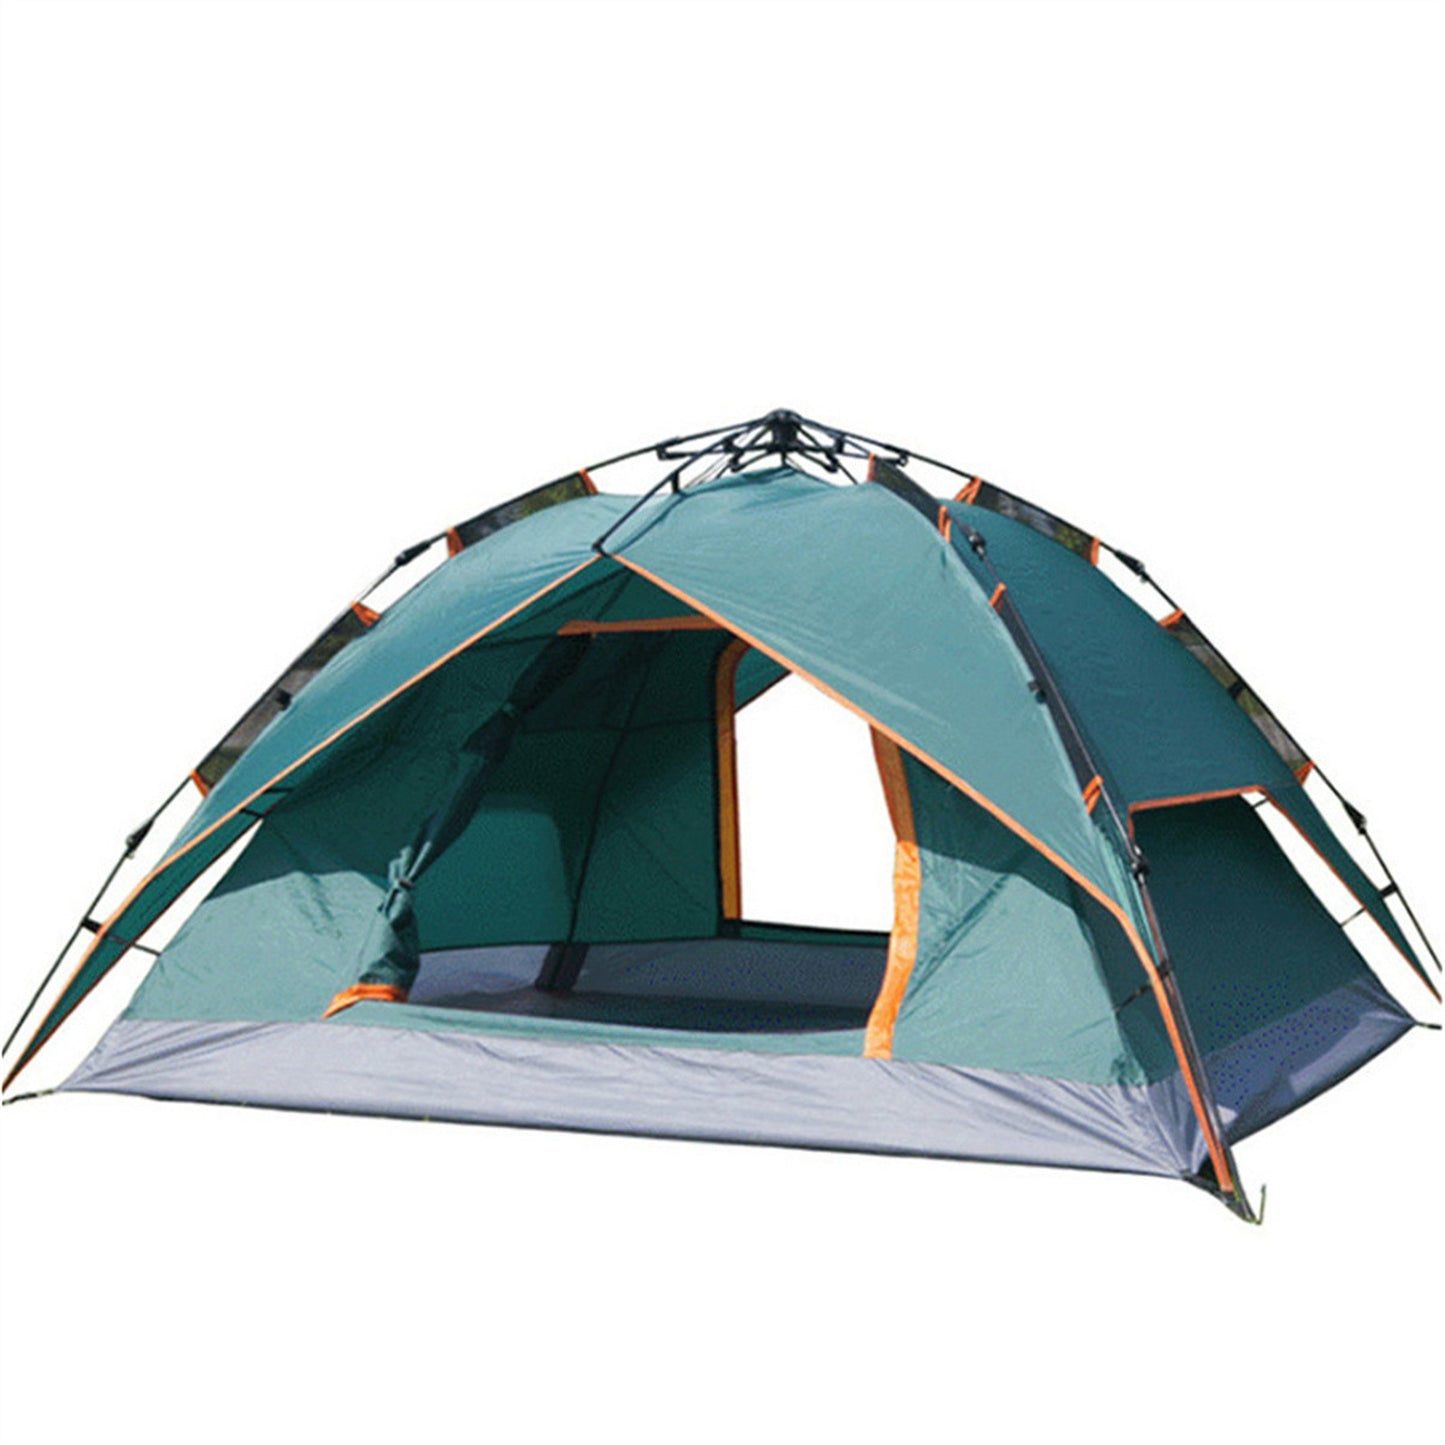 Single layer 3-4 person automatic tent